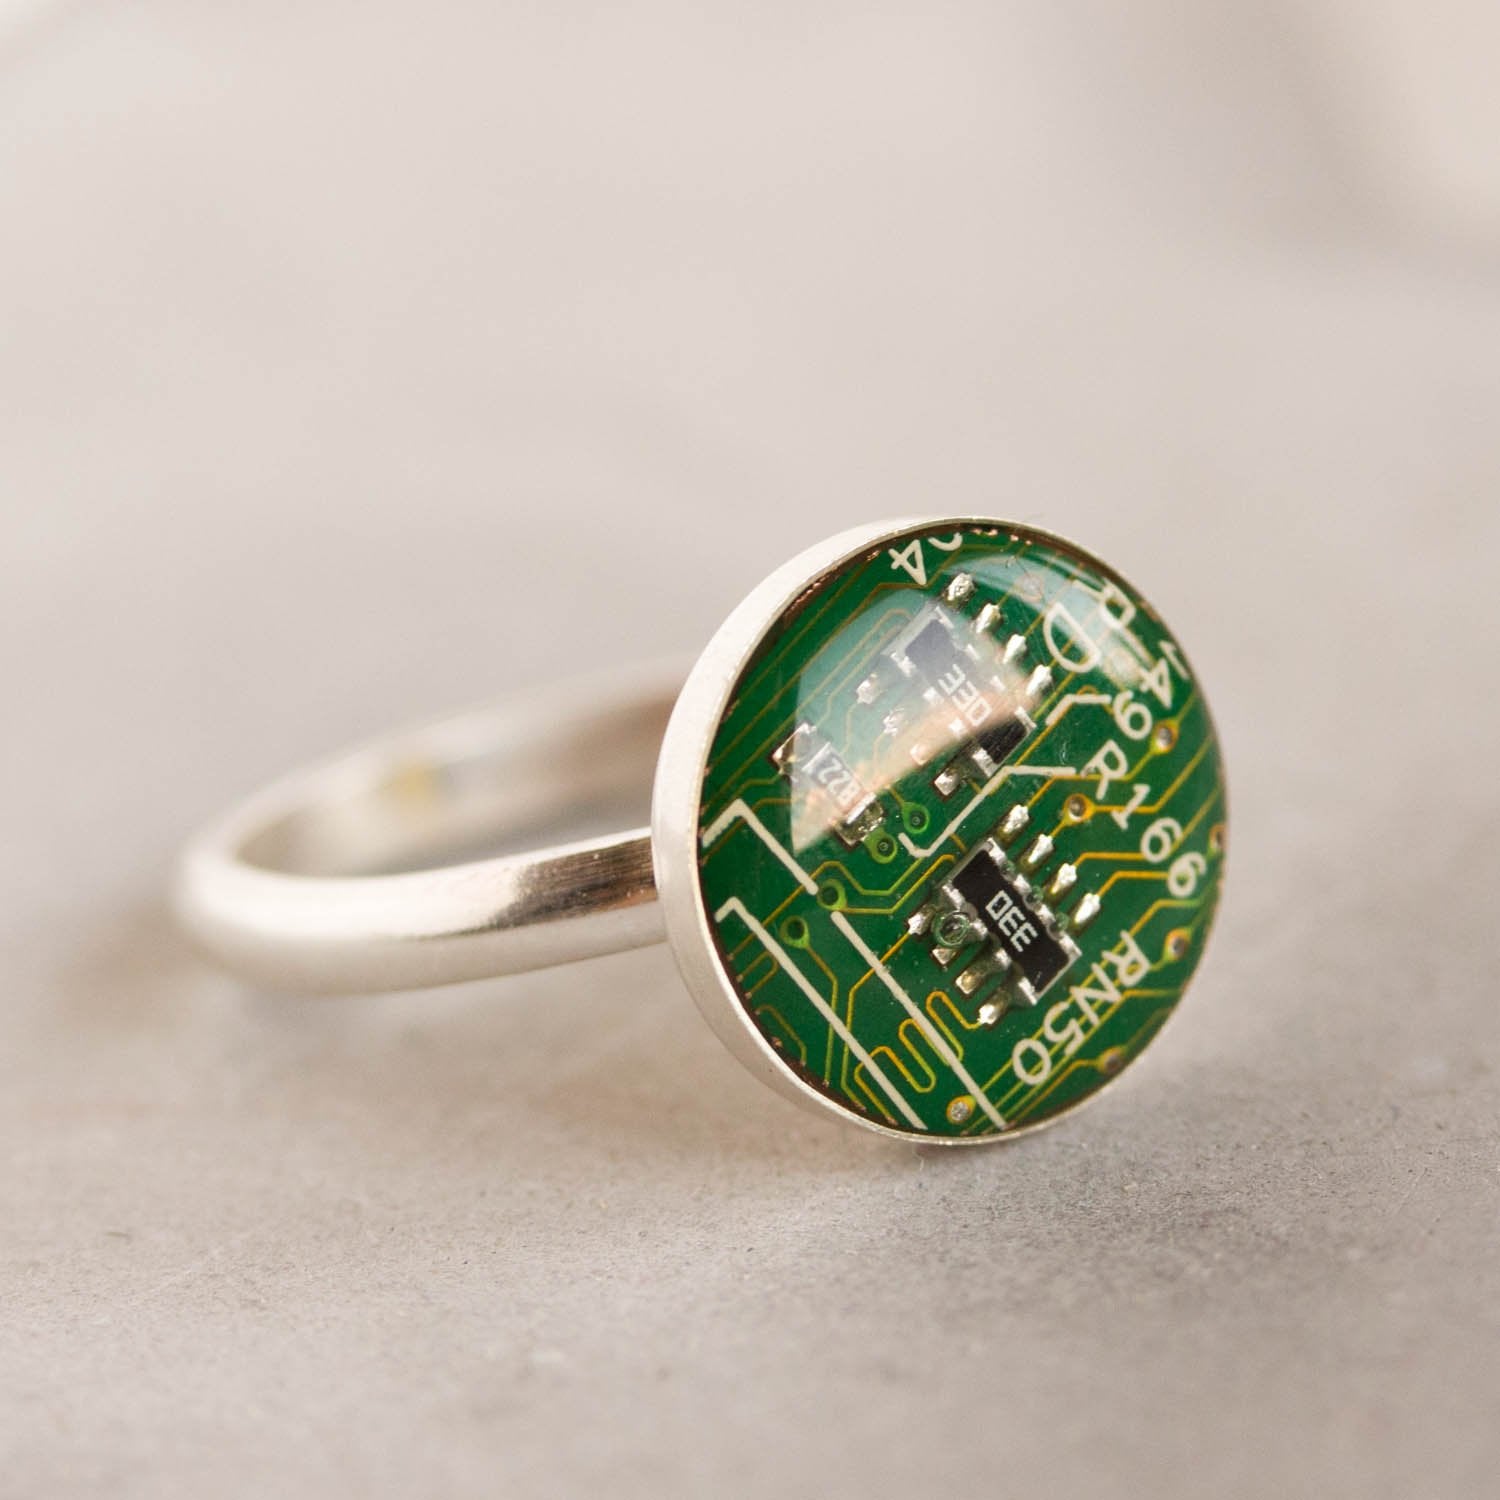 Sterling silver ring with real recycled circuit board piece